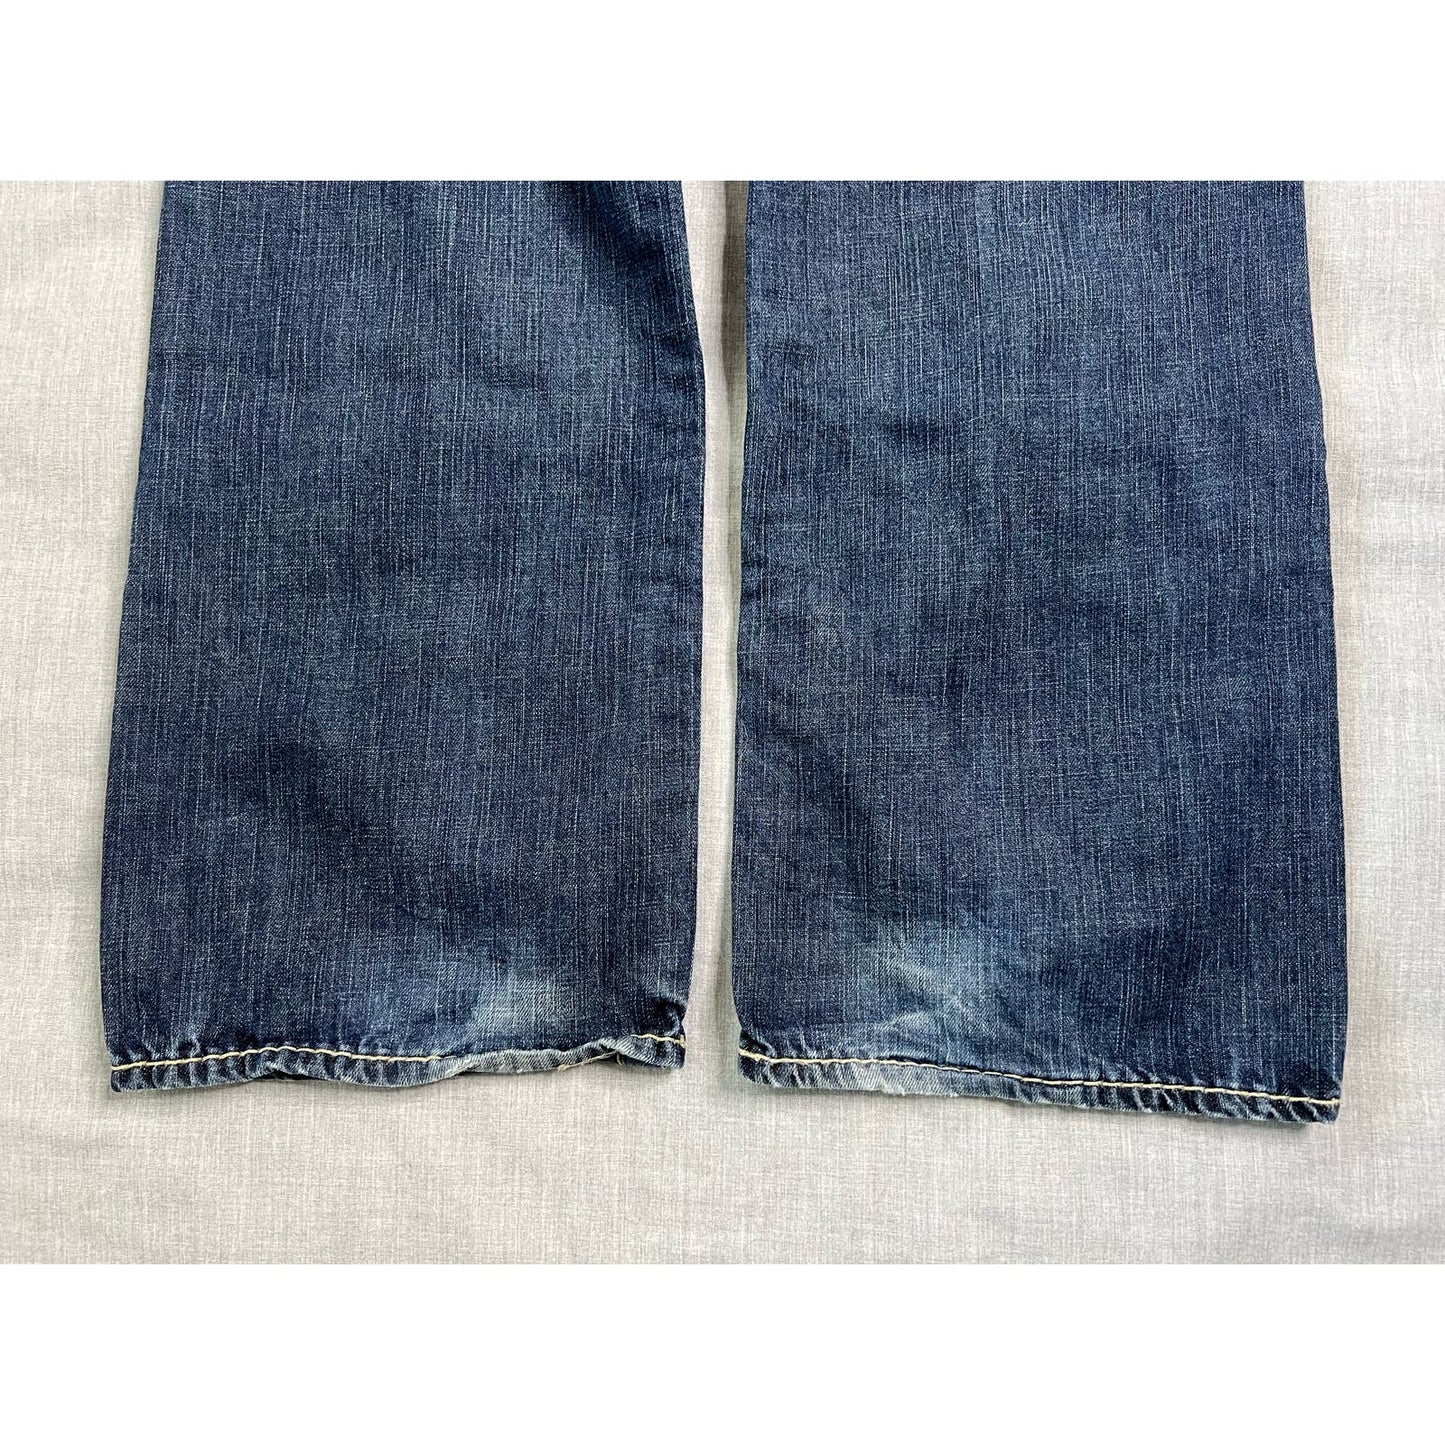 Big Star Bootcut Pioneer Thick Stitch Embroidered Pocket Jeans 34